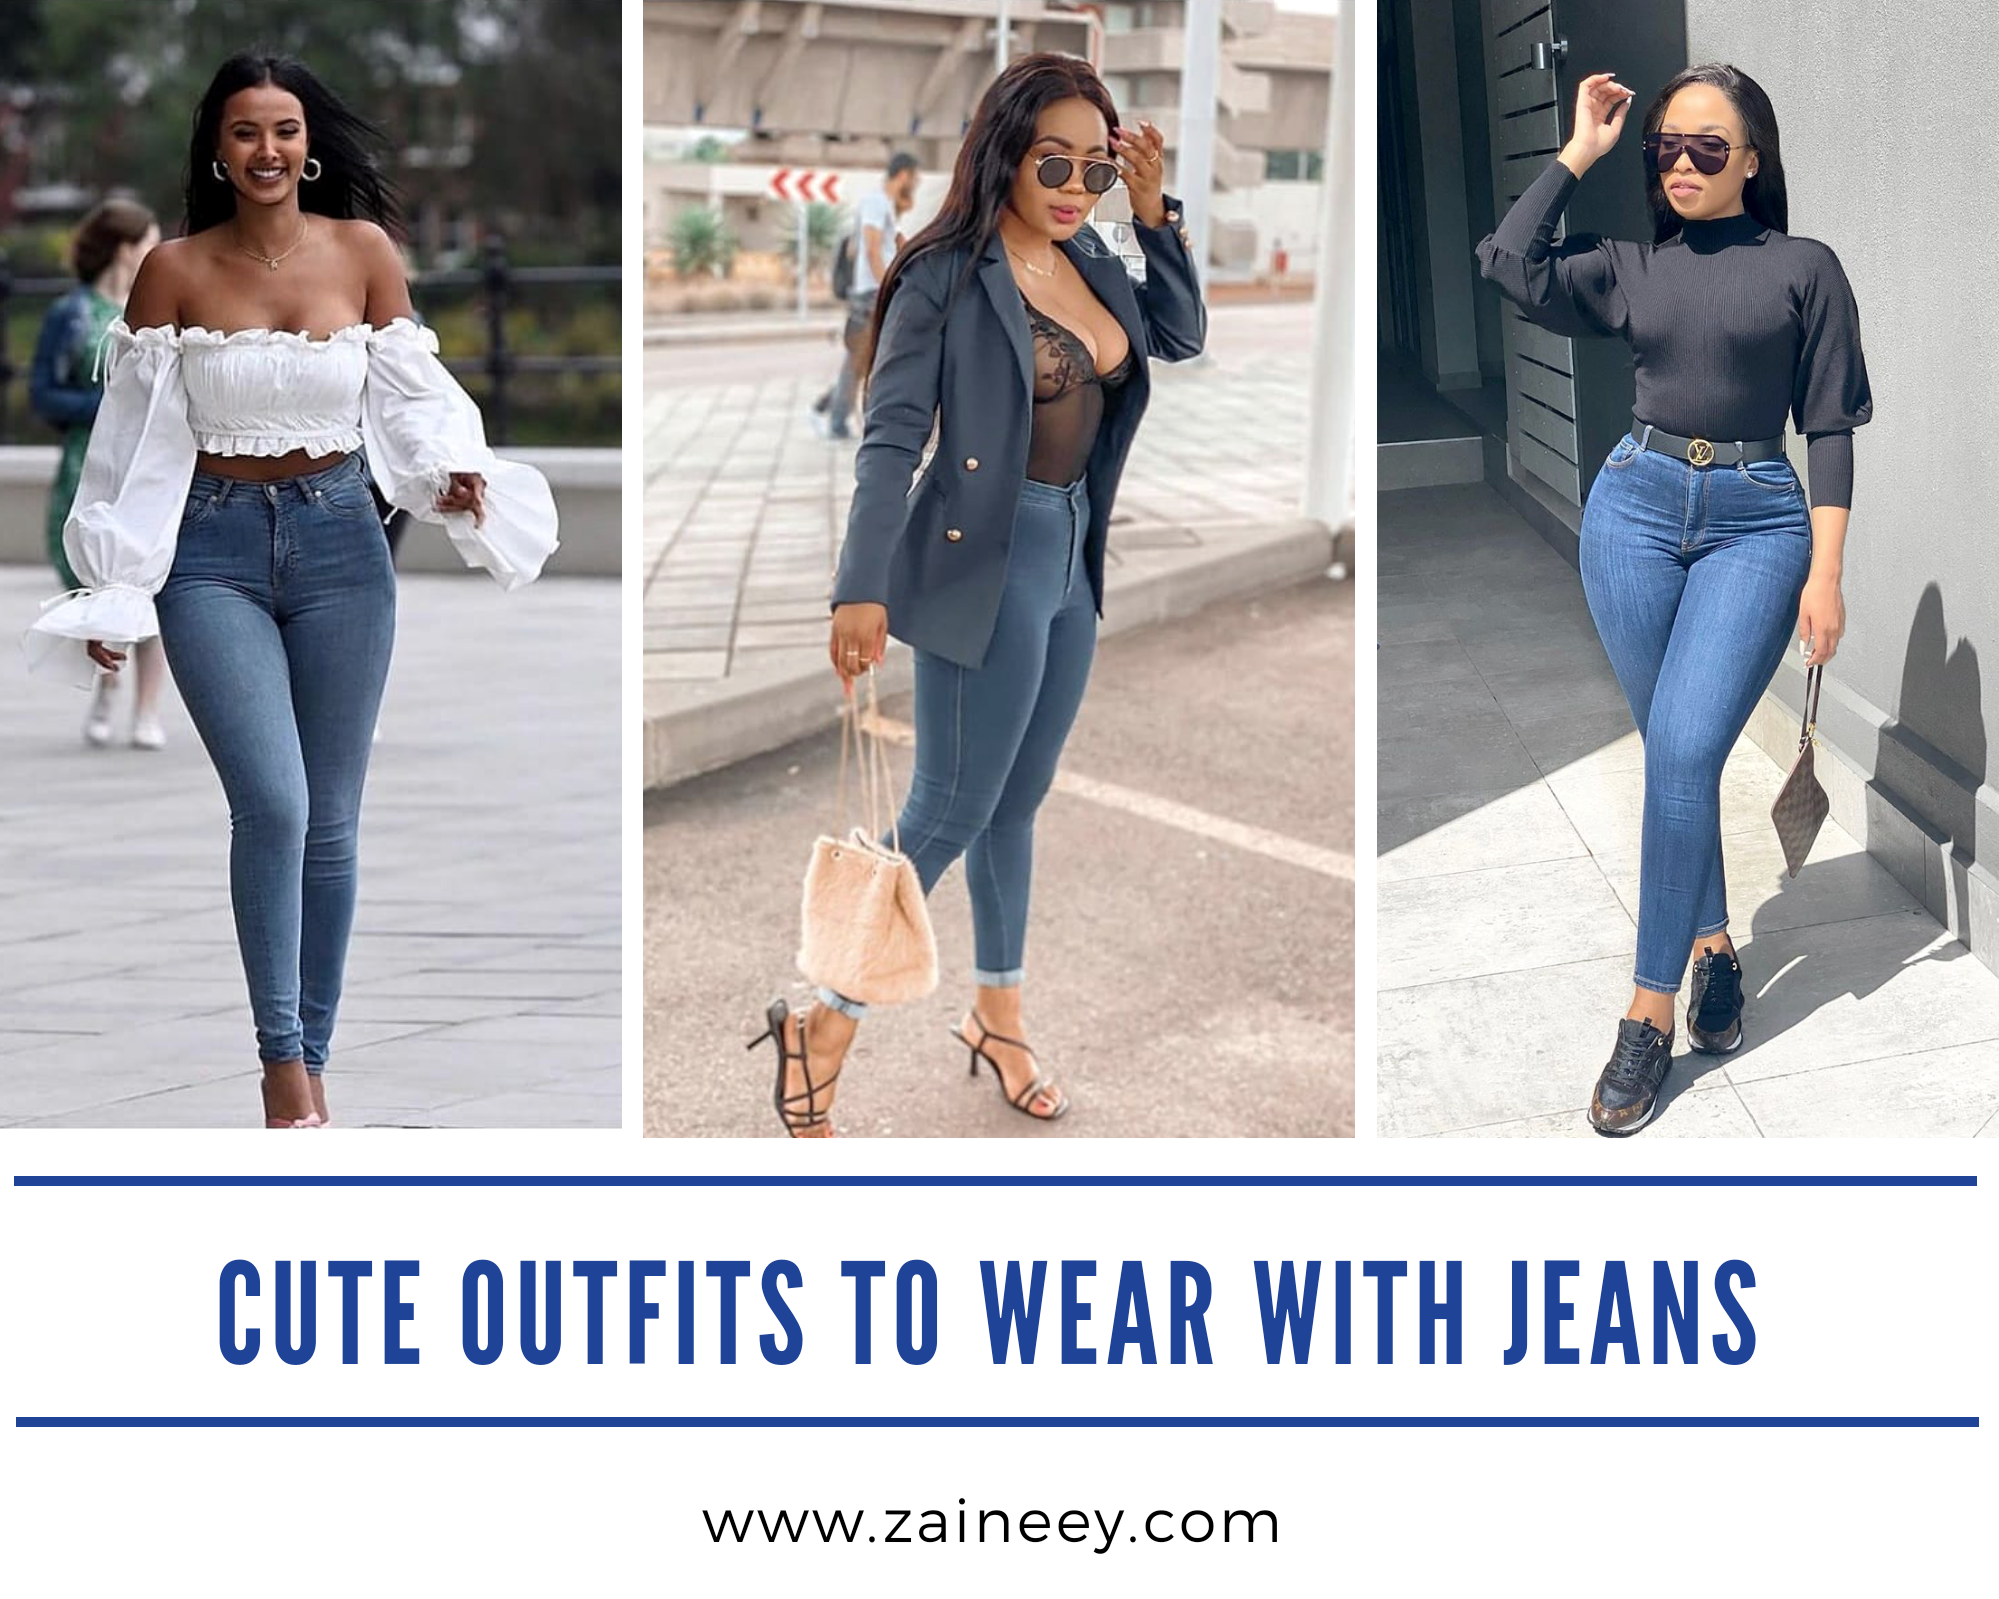 Simple, Outstanding, and Cute outfits to wear with jeans.